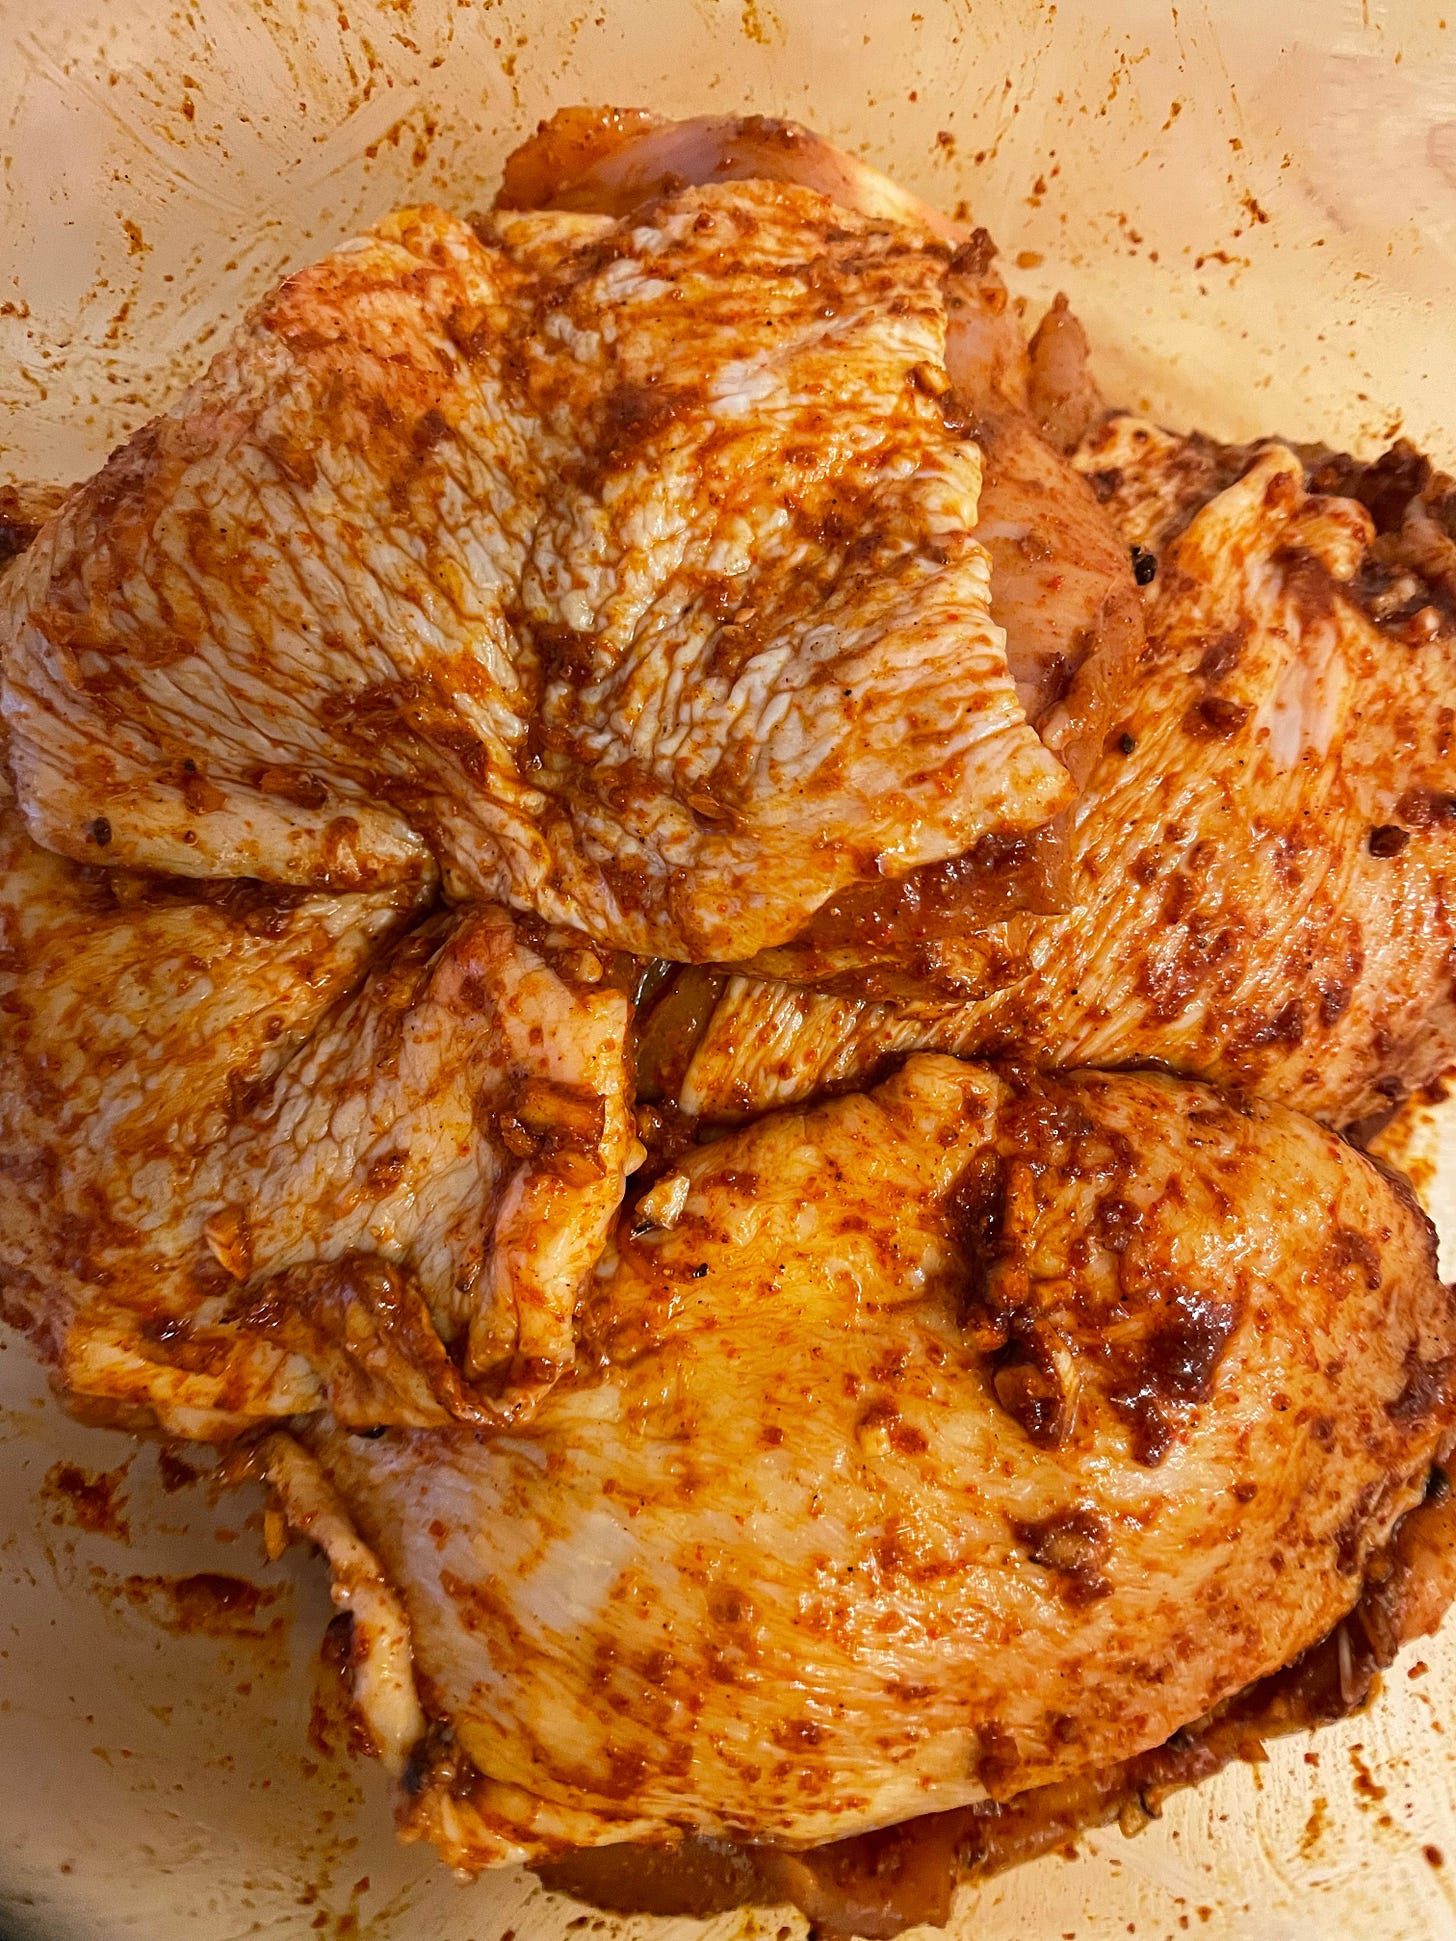 Marinated chicken thighs with Armenian spices